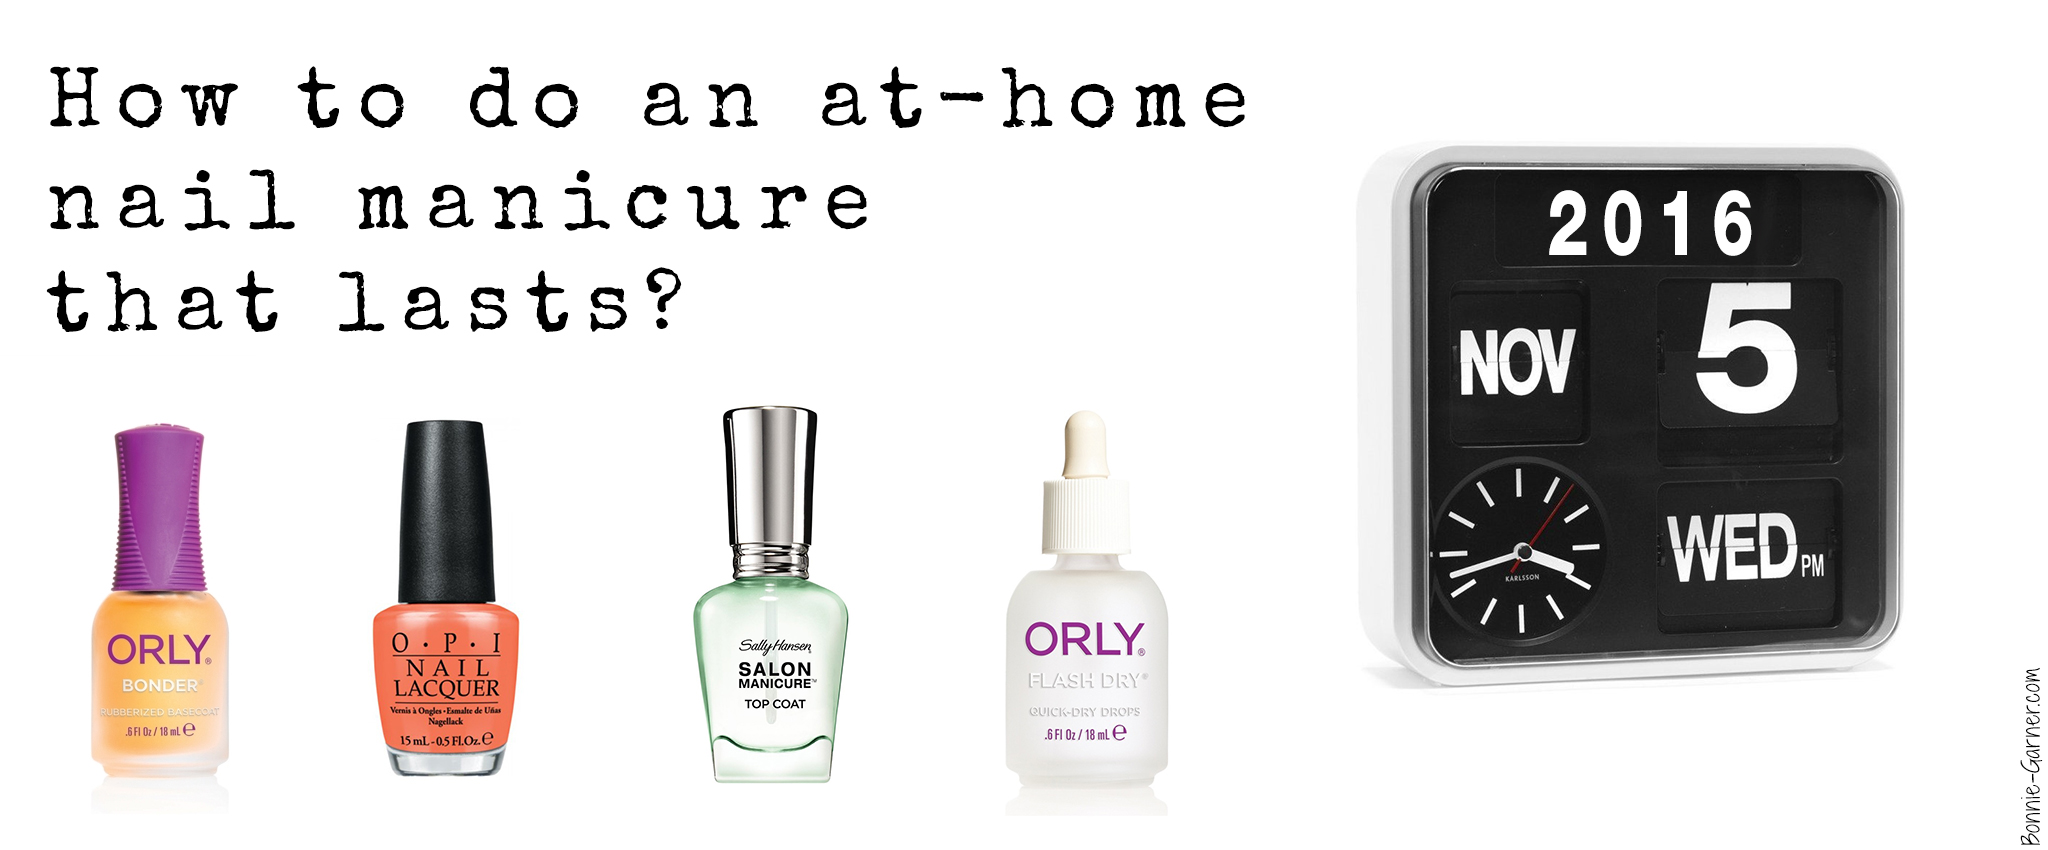 How to do an at-home nail manicure that lasts?